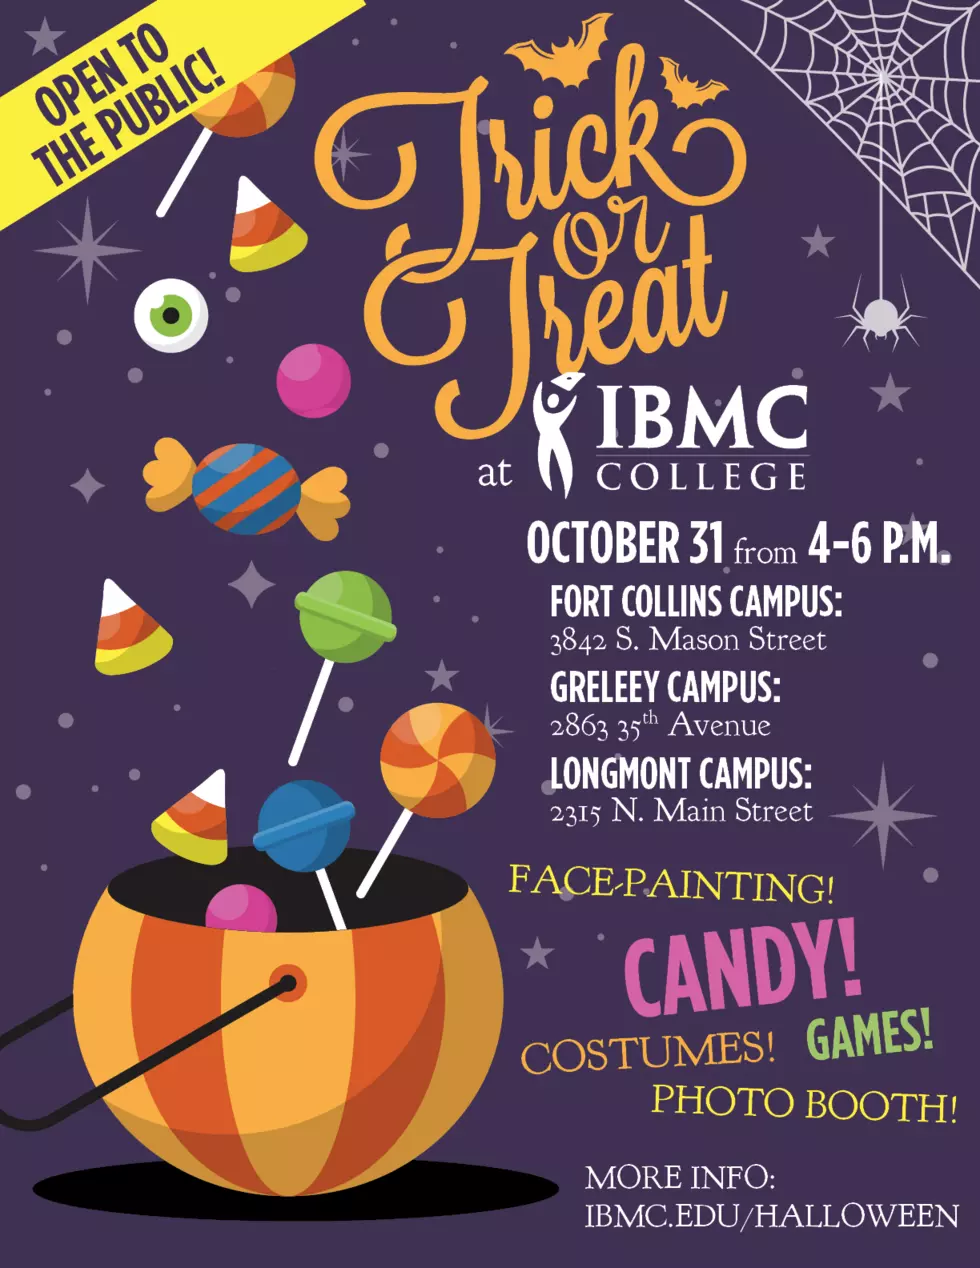 Trick or Treat at IBMC College